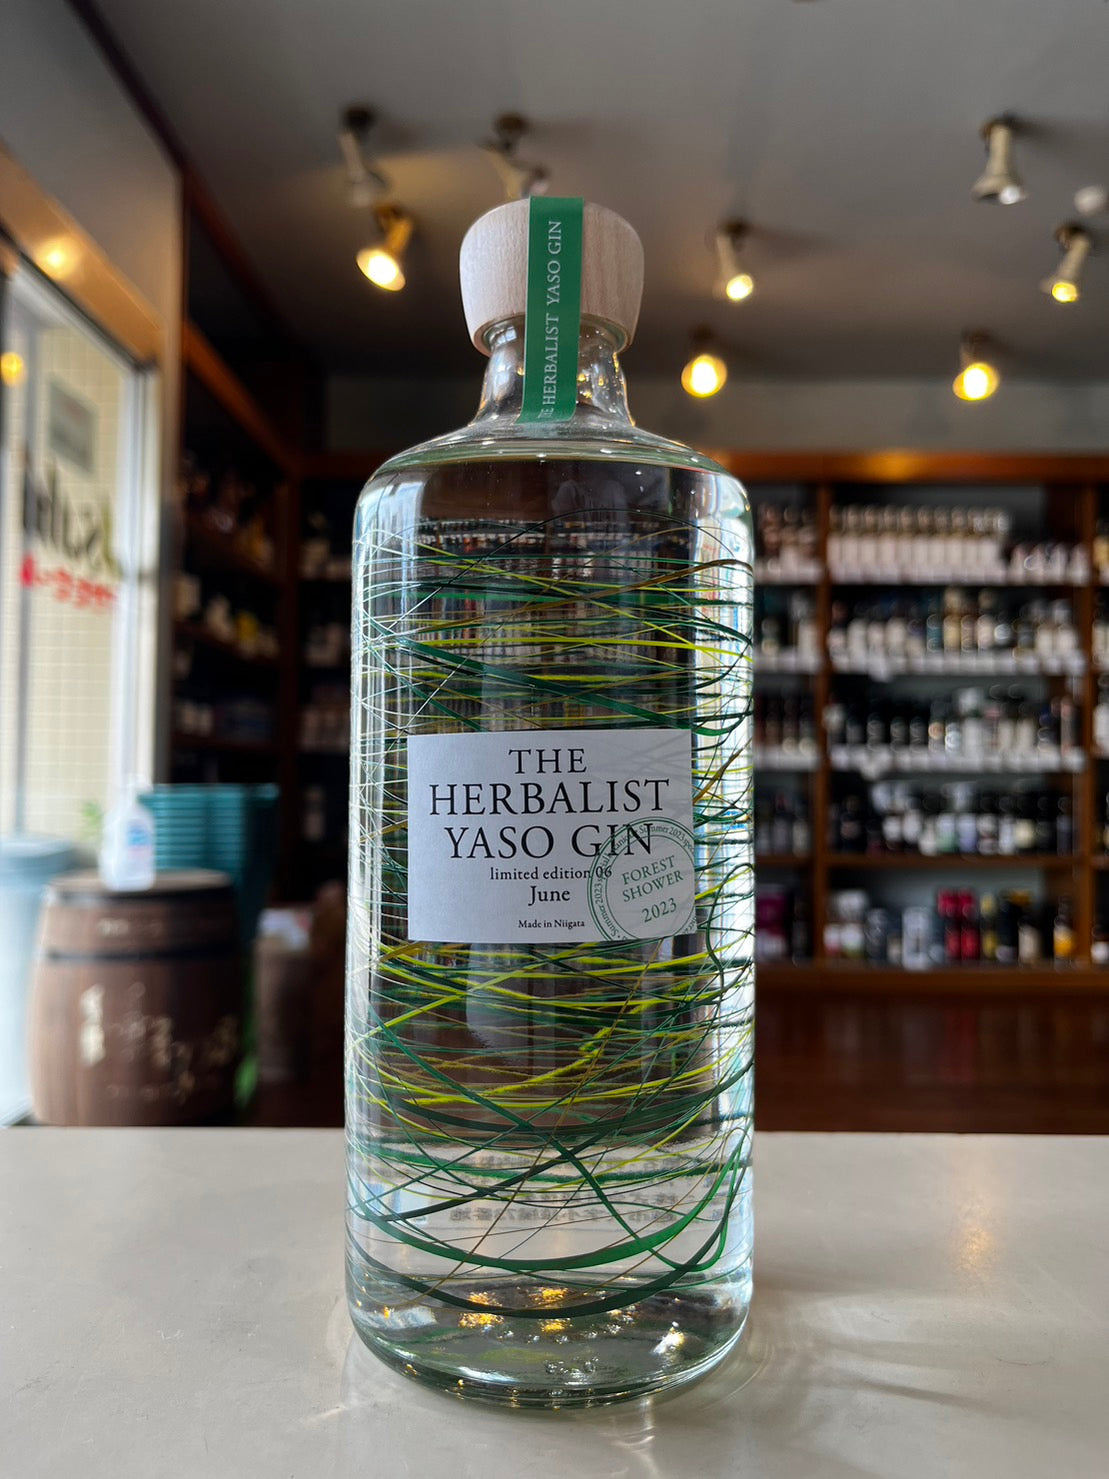 THE HERBALIST YASO GIN  Limited edition 06 June   FOREST SHOWER   ヤソ　ジン　フォレストシャワー